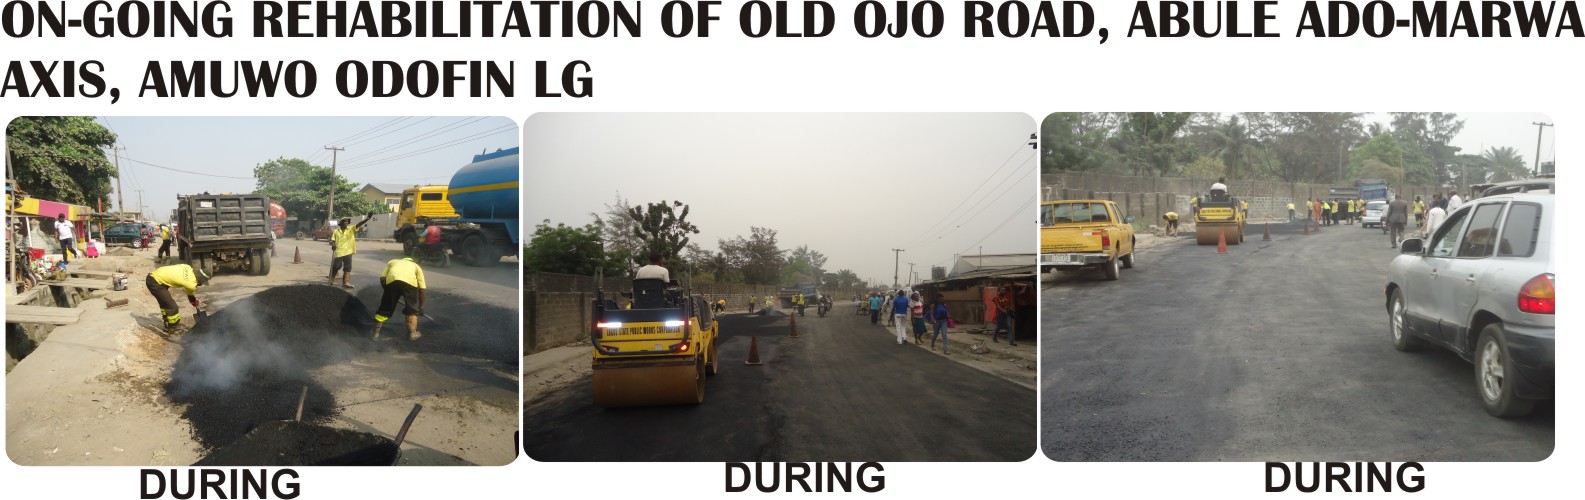 ON-GOING REHABILITATION OF OLD OJO ROAD, ABULE ADO-MARWA